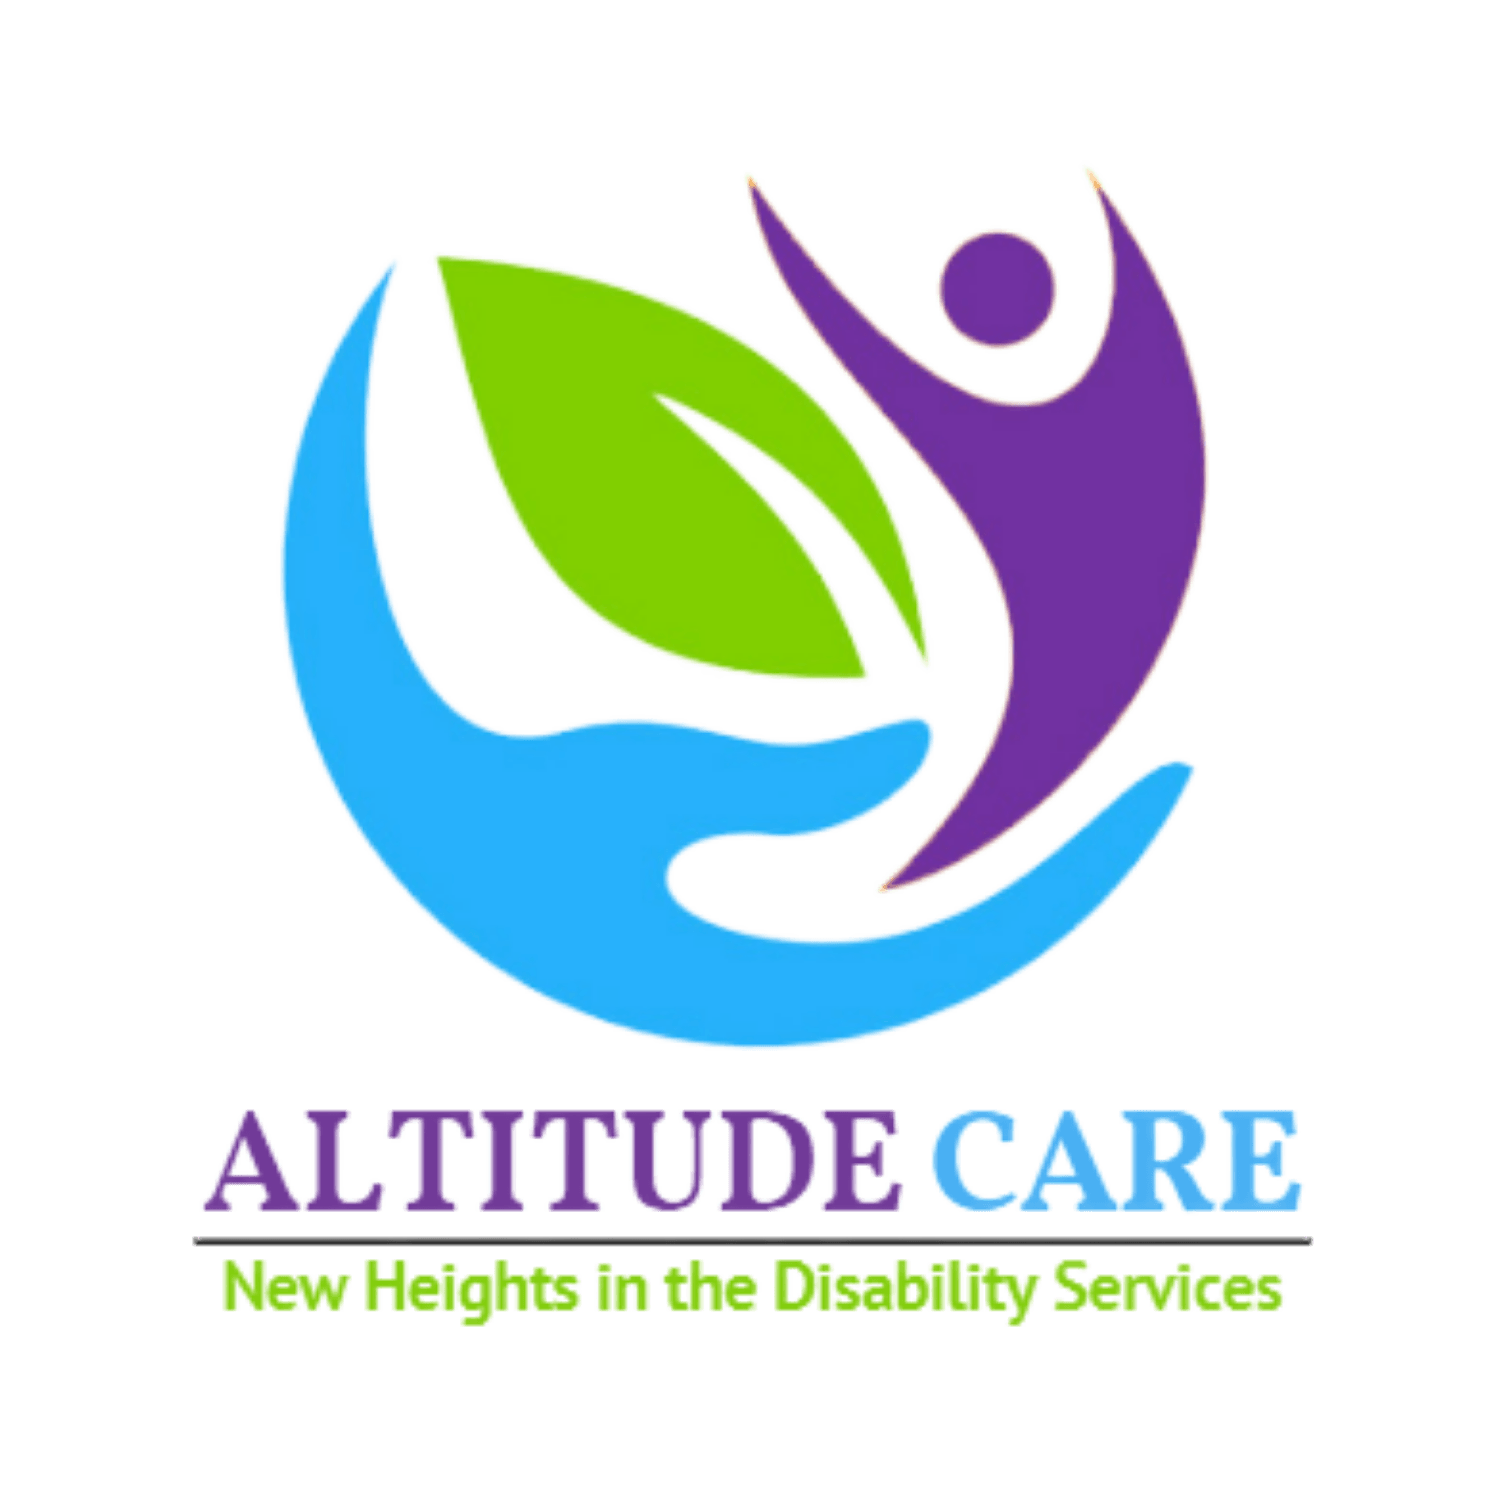 Altitude Care | NDIS Disability Care in Perth - Get In Touch With Us